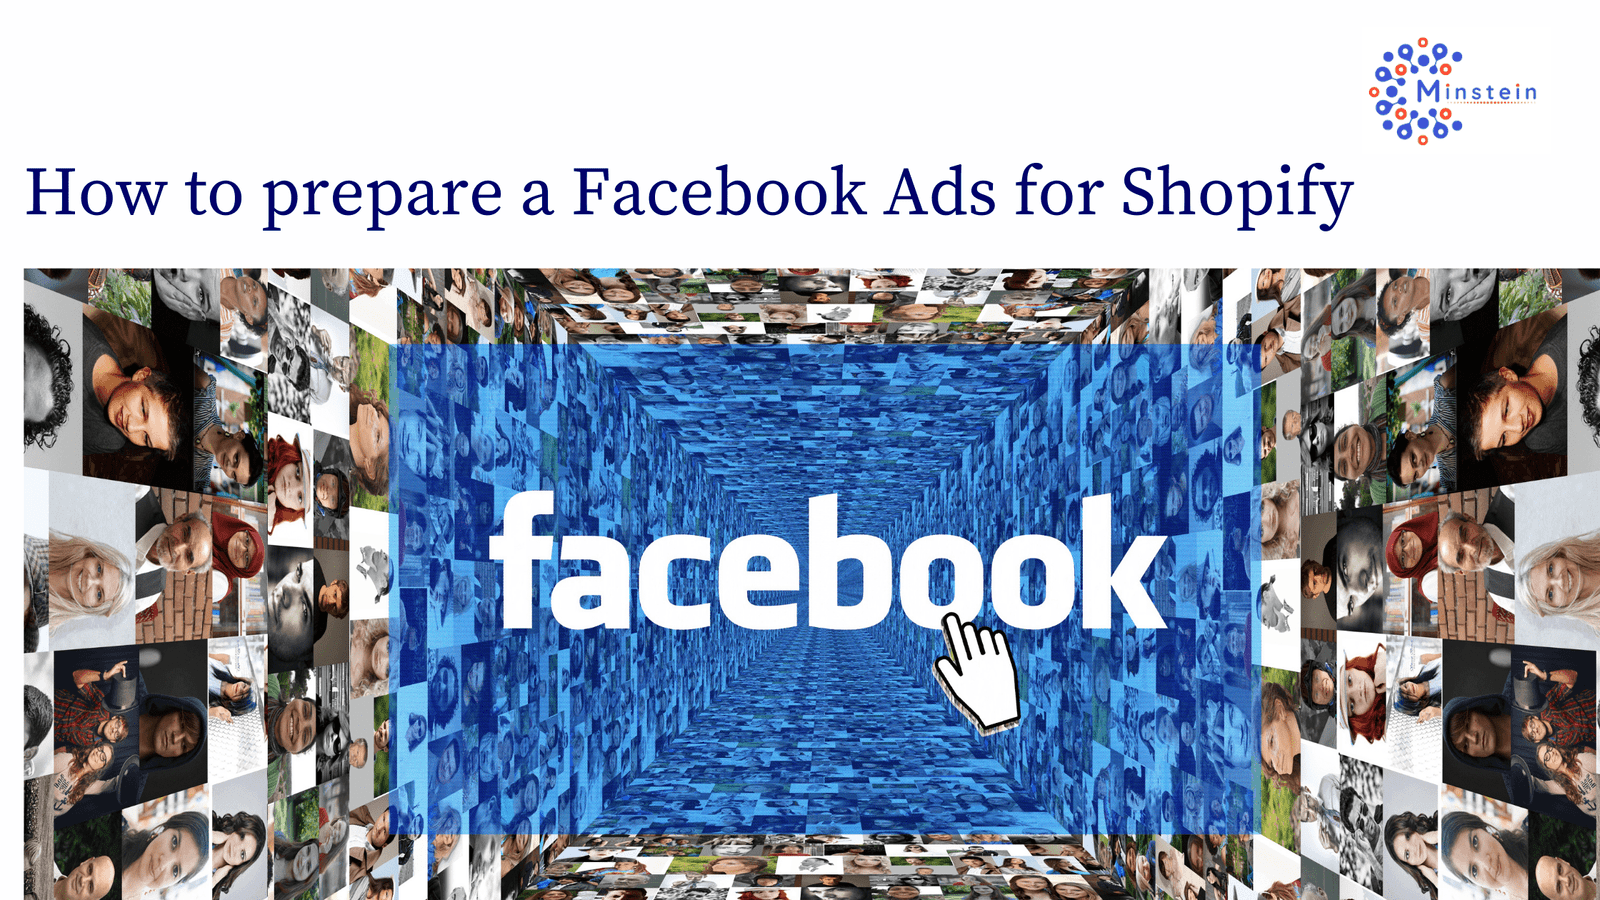 Easy Ideas to Prepare Facebook Ads for Shopify Store